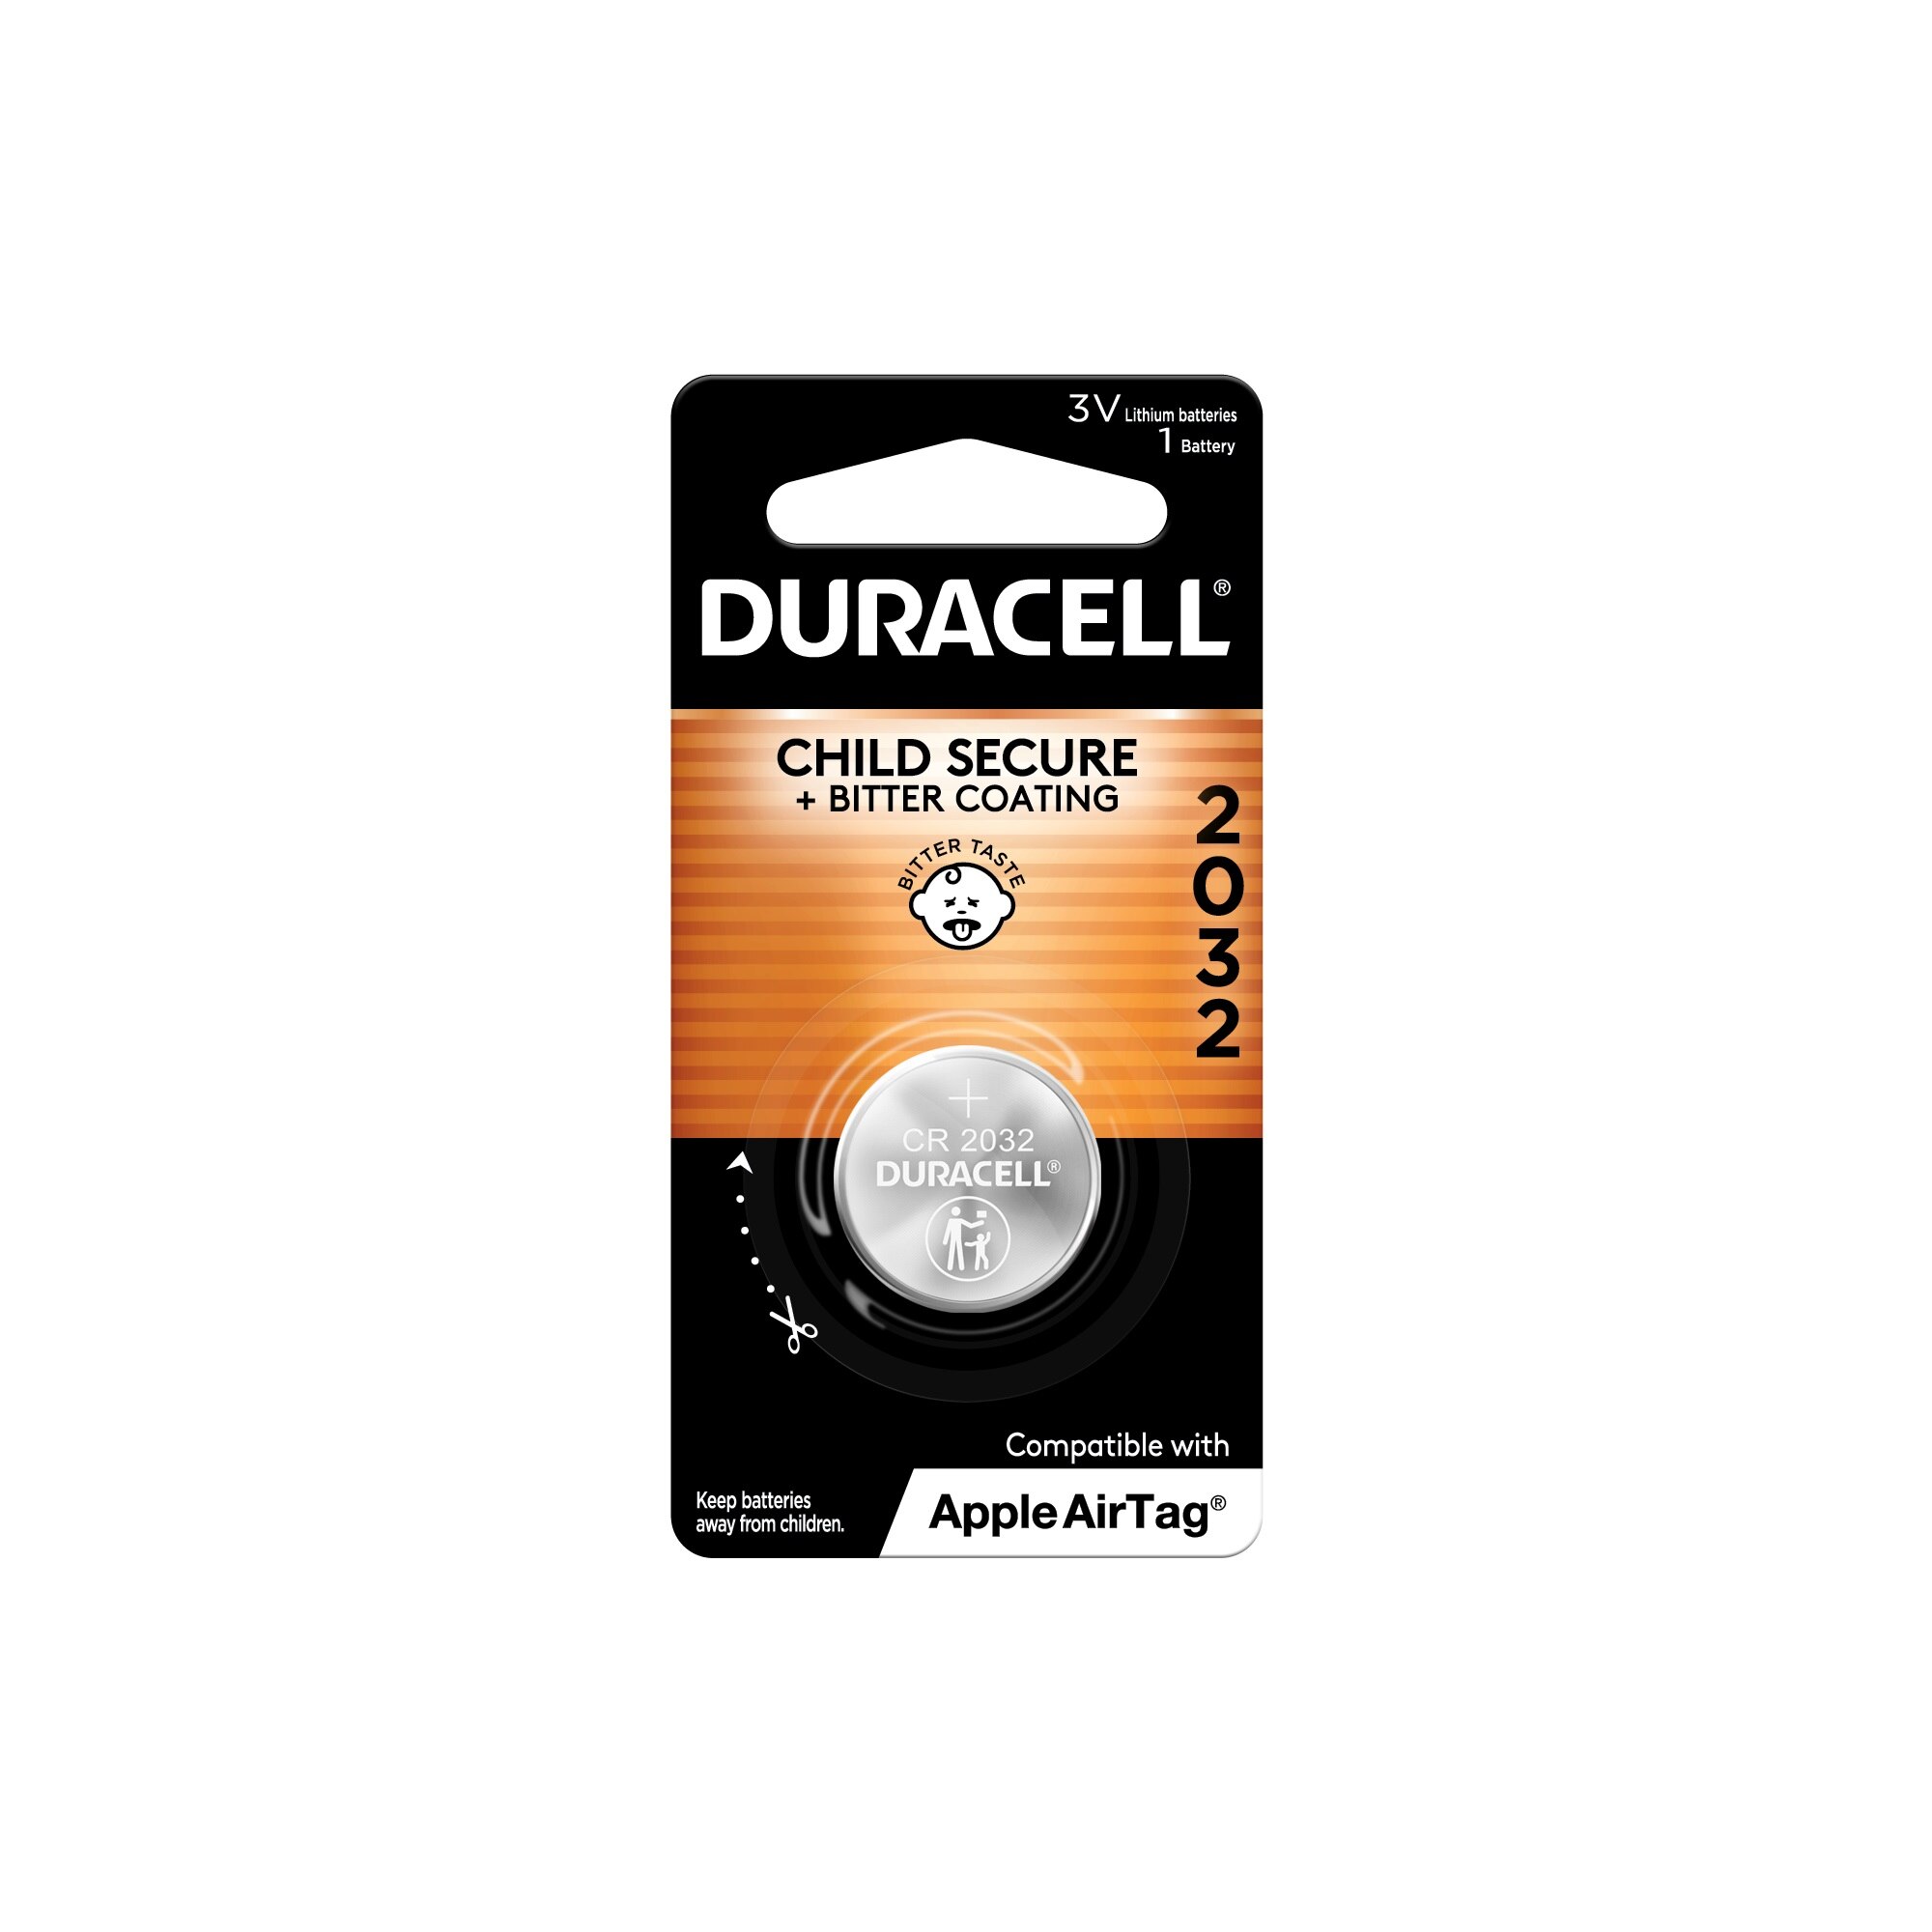 Duracell 2032 3V Lithium Coin Battery, 1/Pack